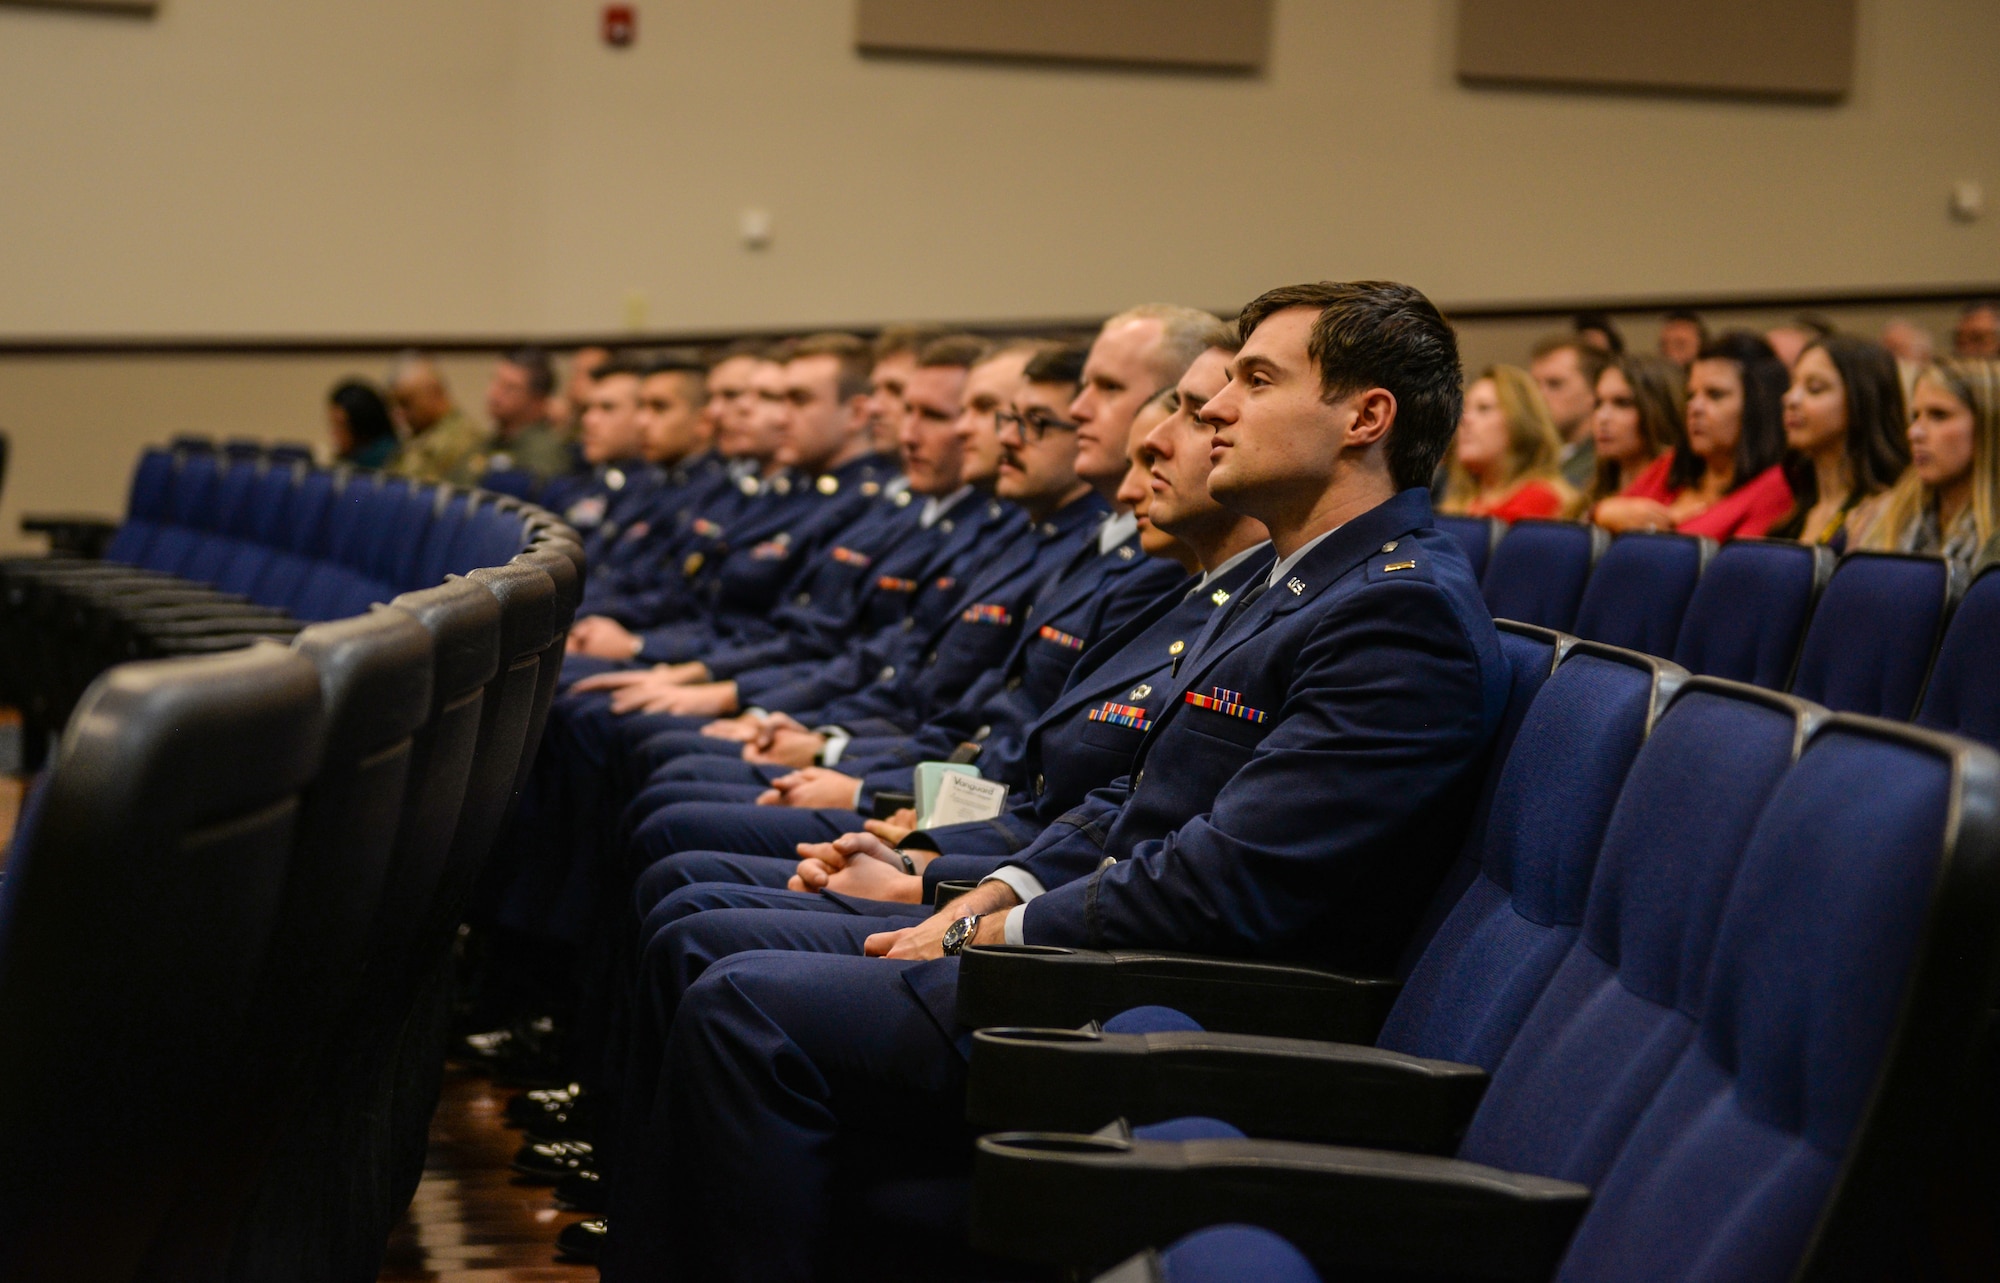 Specialized Undergraduate Pilot Training Class 20-04/05 listens to a speech at their graduation ceremony, Dec. 13, 2019, at Columbus Air Force Base, Miss. To graduate from SUPT at Columbus AFB, students must conduct over a year of pilot training. (U.S. Air Force photo by Airman Davis Donaldson)